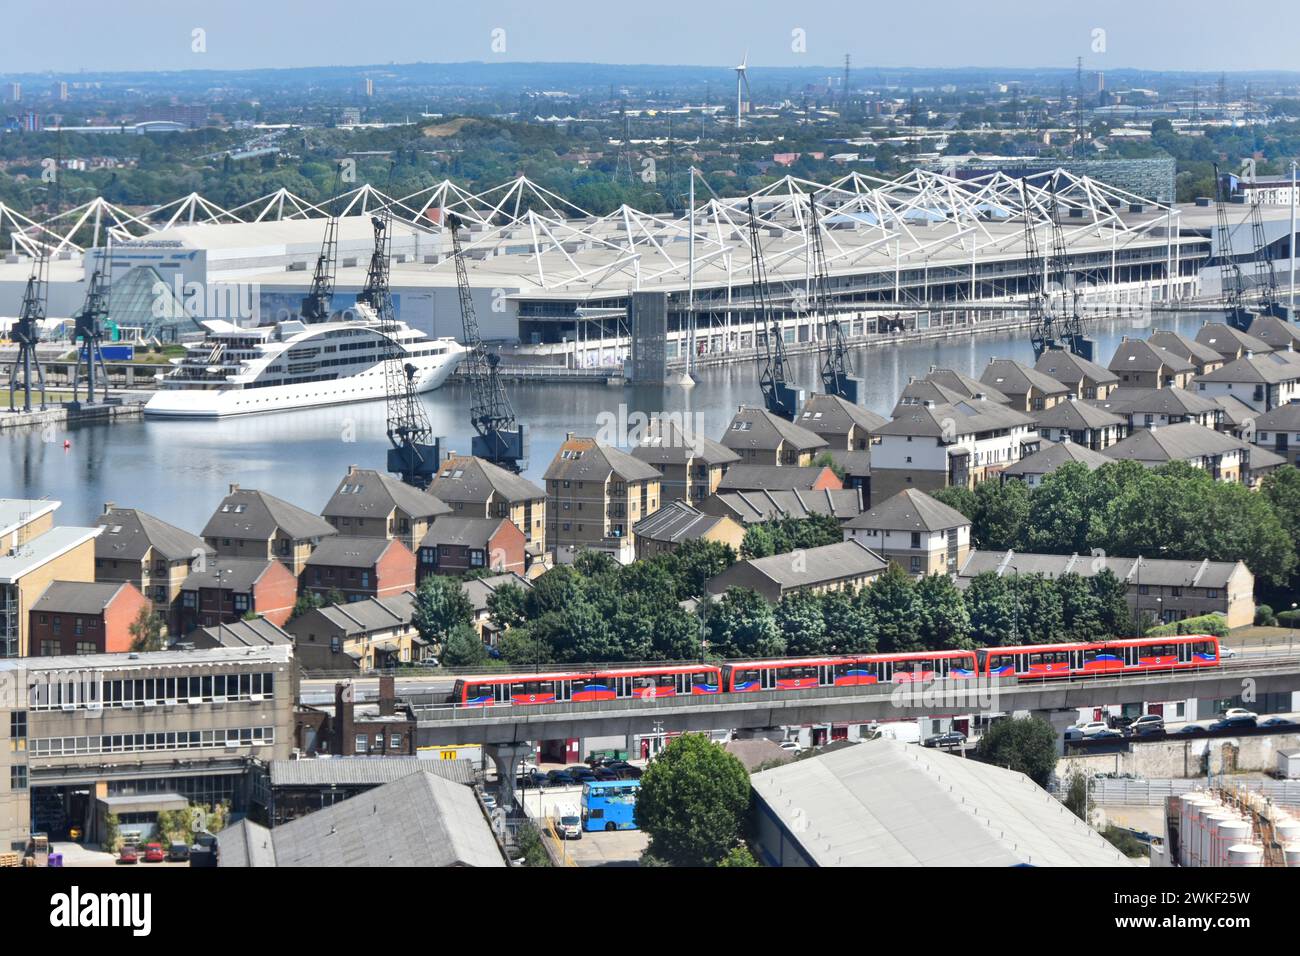 Docklands Light Railway train aerial view urban landscape Royal Victoria Dock & roof of Excel Exhibition Centre Silvertown East London  England UK Stock Photo